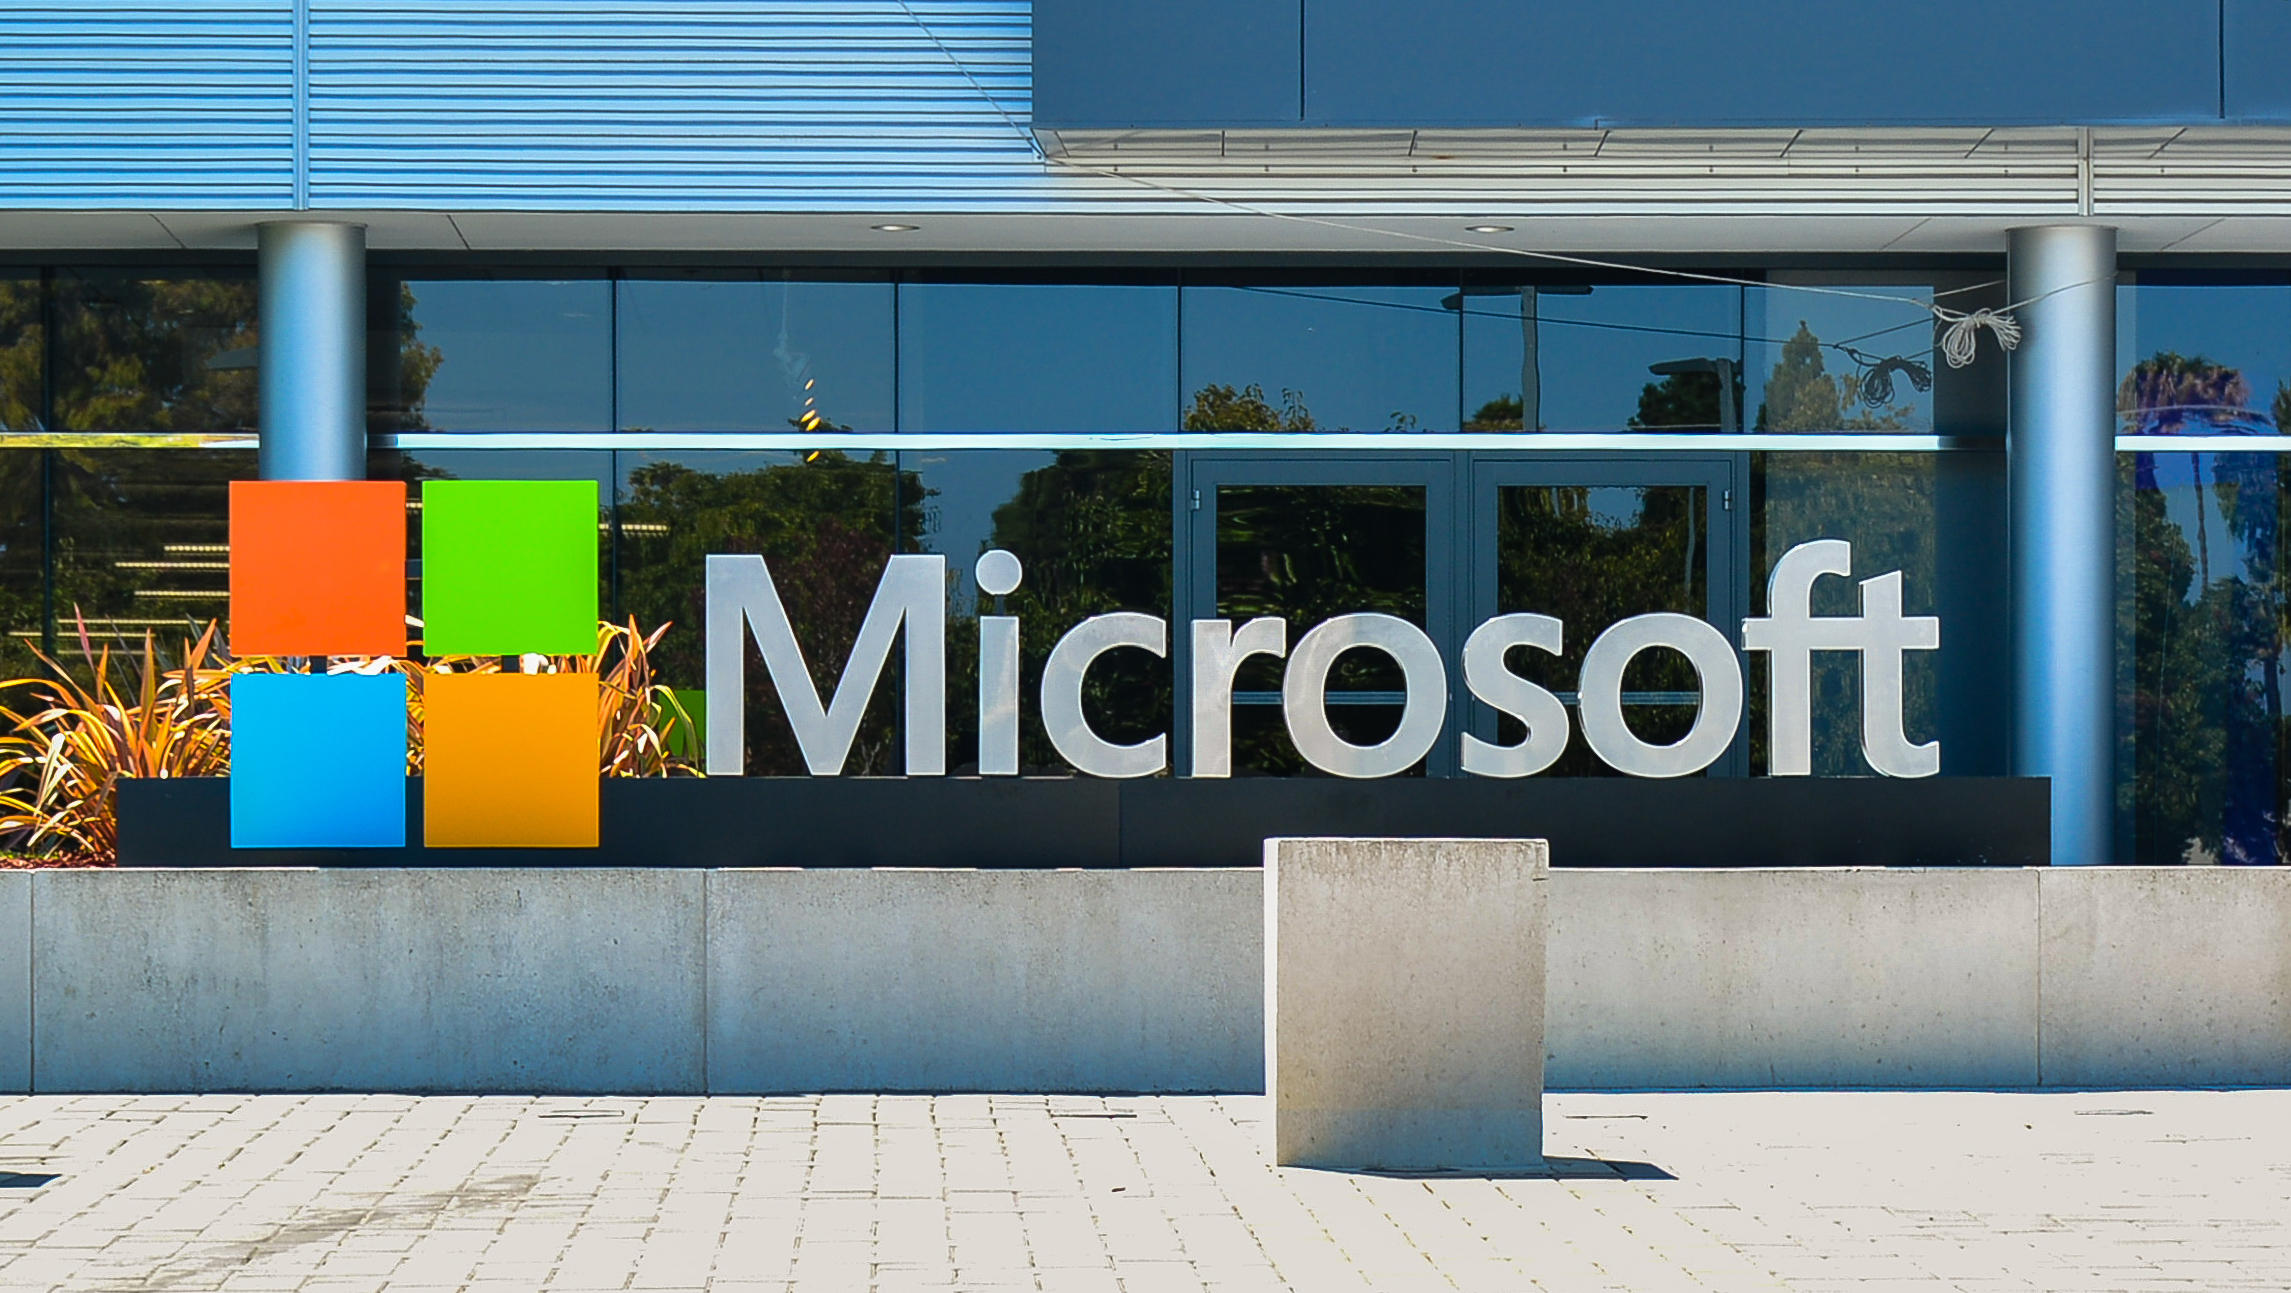 Microsoft slams governments for "stockpiling" software vulnerabilities